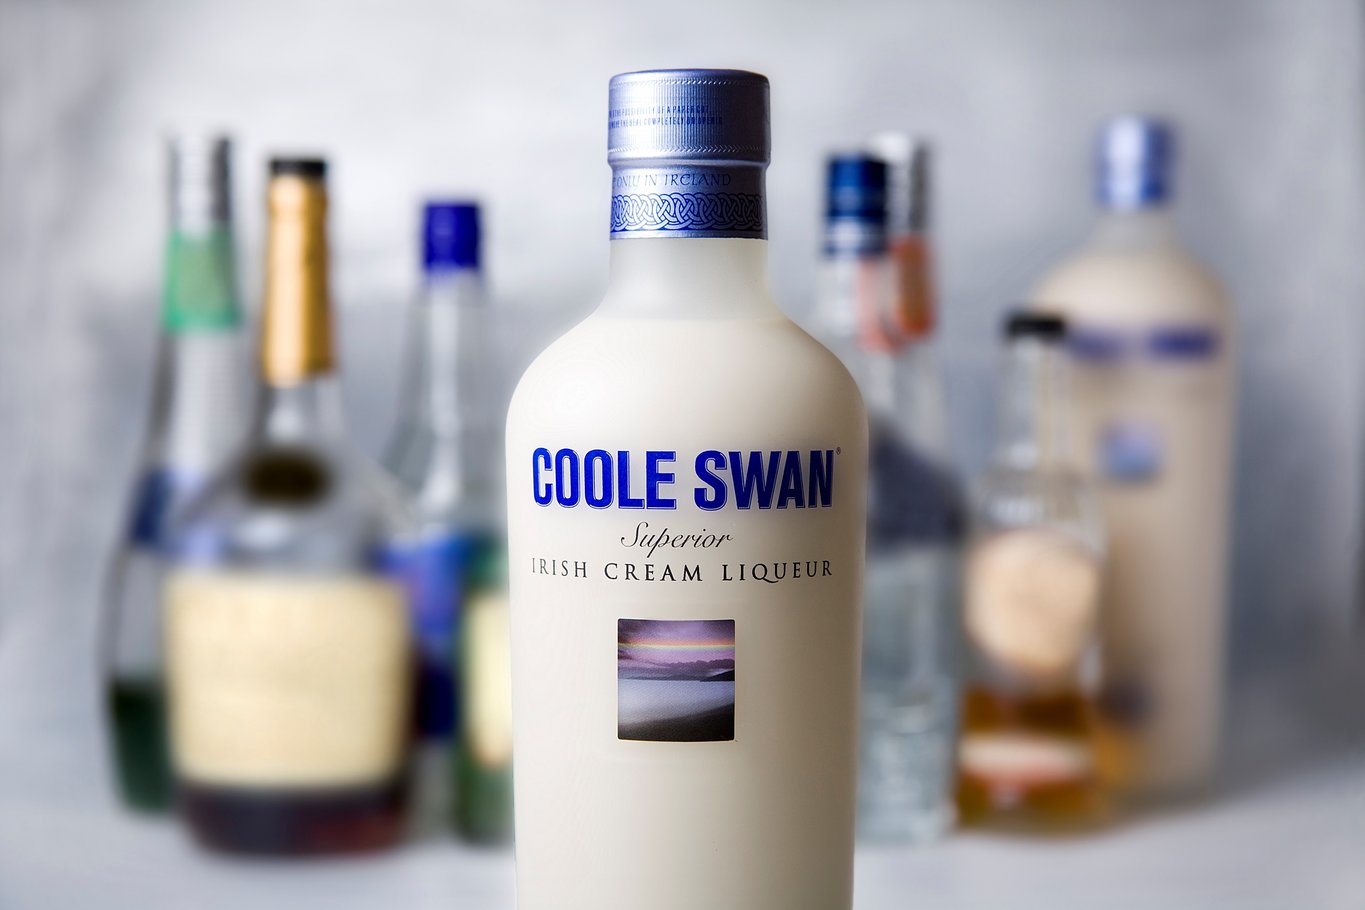  Coole Swan, now available from Barry & Fitzwilliam, blends single malt Irish whiskey, Belgian white chocolate and fresh dairy cream straight from the heart of Ireland’s Boyne Valley pastureland. 